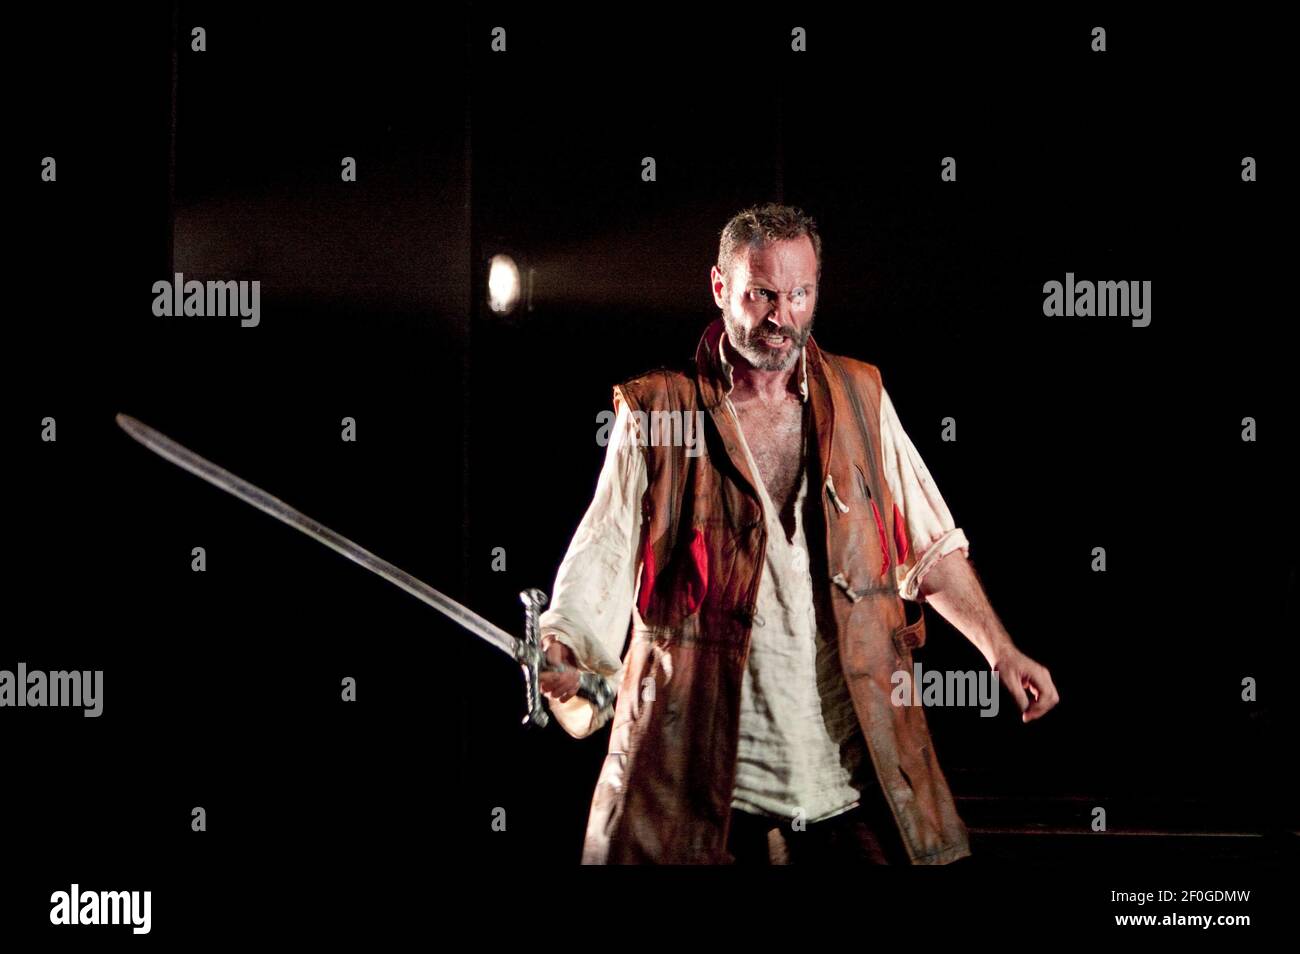 Andrew Rees (Siegmund) with Nothung (magic sword) in DIE WALKURE by Wagner at Longborough Festival Opera, Gloucestershire, England  24/07/2010 conductor: Anthony Negus  design: Kjell Torriset  lighting: Guy Hoare  director: Alan Privett Stock Photo